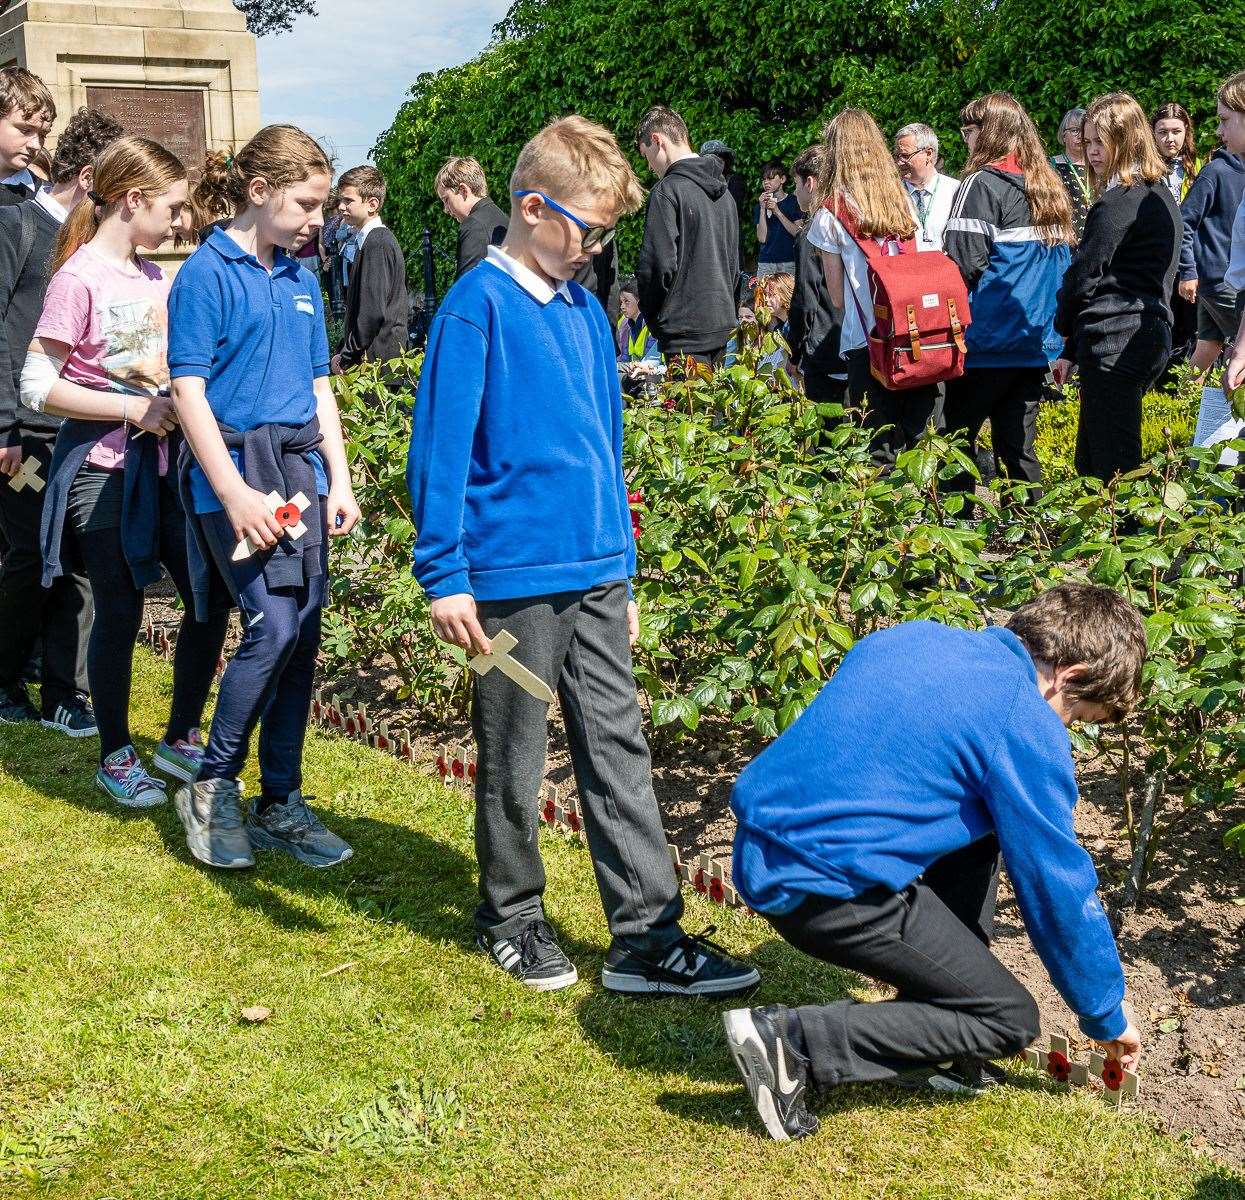 Pupils from Dornoch Primary School and Dornoch Academy planted crosses around the rose beds Picture: Andy Kirby